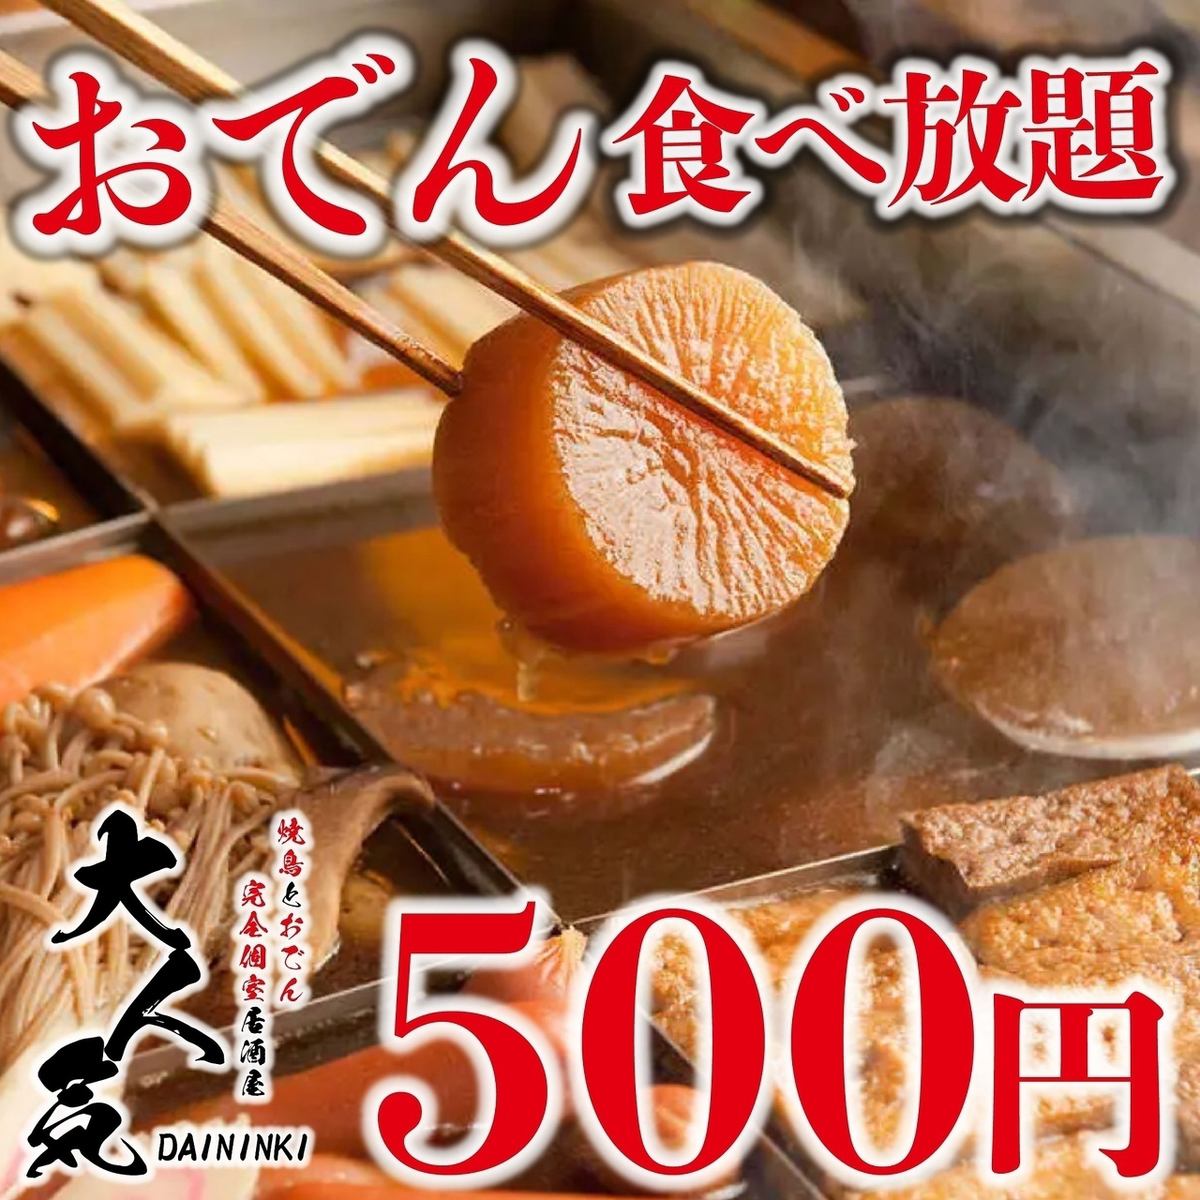 All-you-can-eat and drink of 130 dishes including oden with special soup stock is only 3,500 yen.